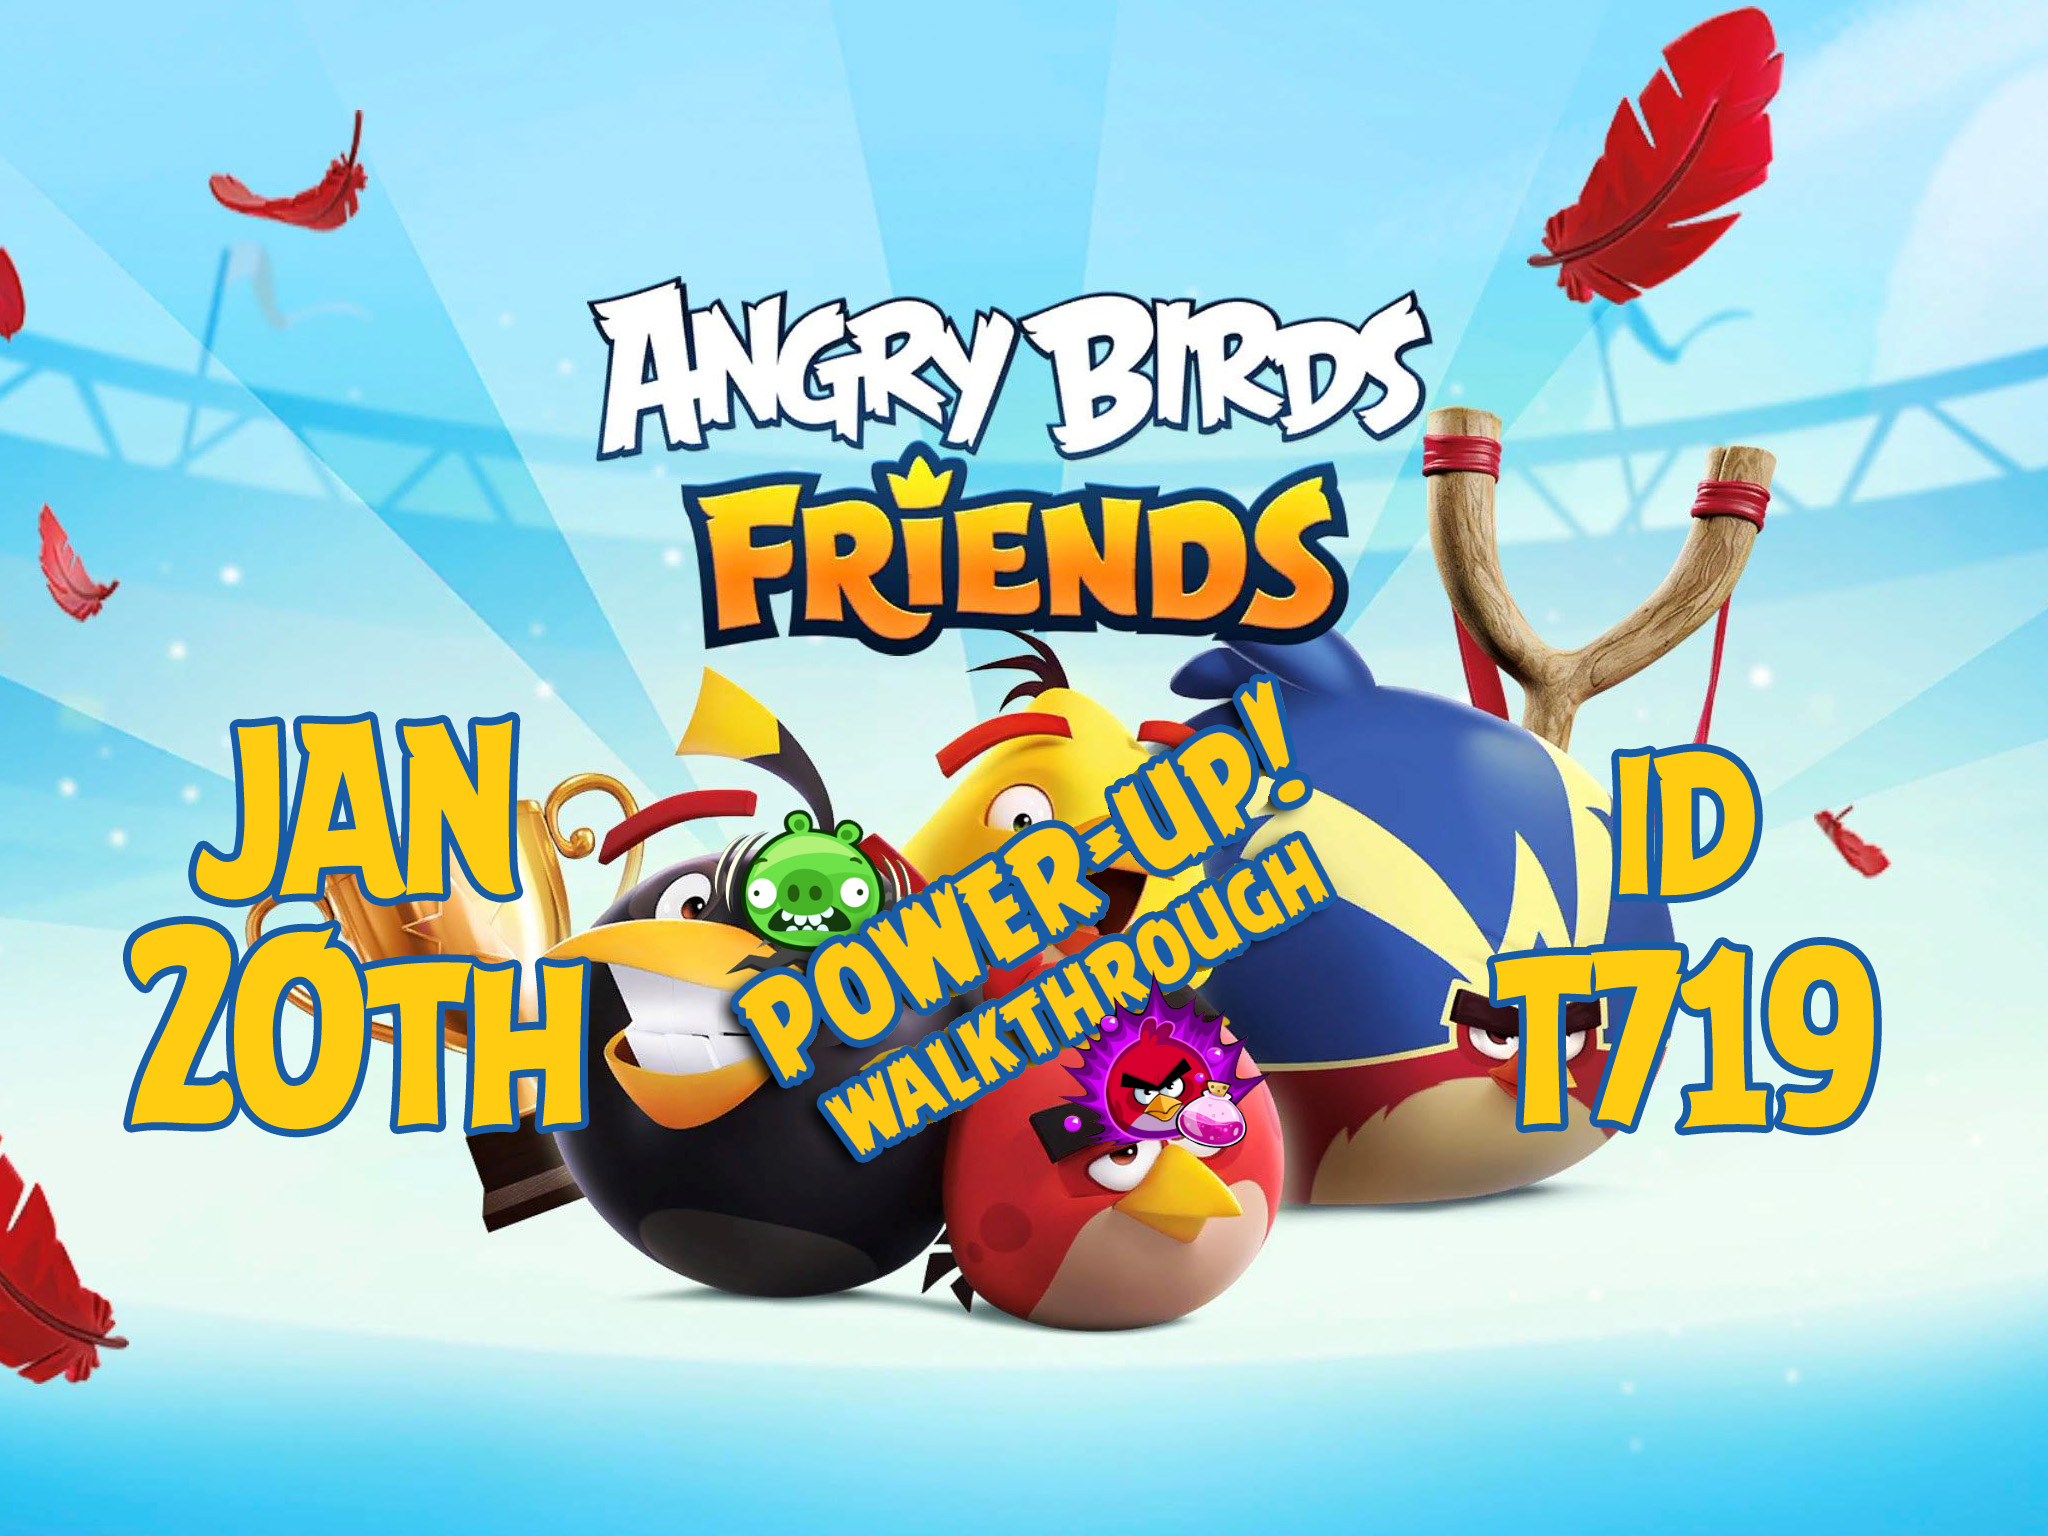 Angry-Birds-Friends-Tournament-T719-Feature-Image-PU